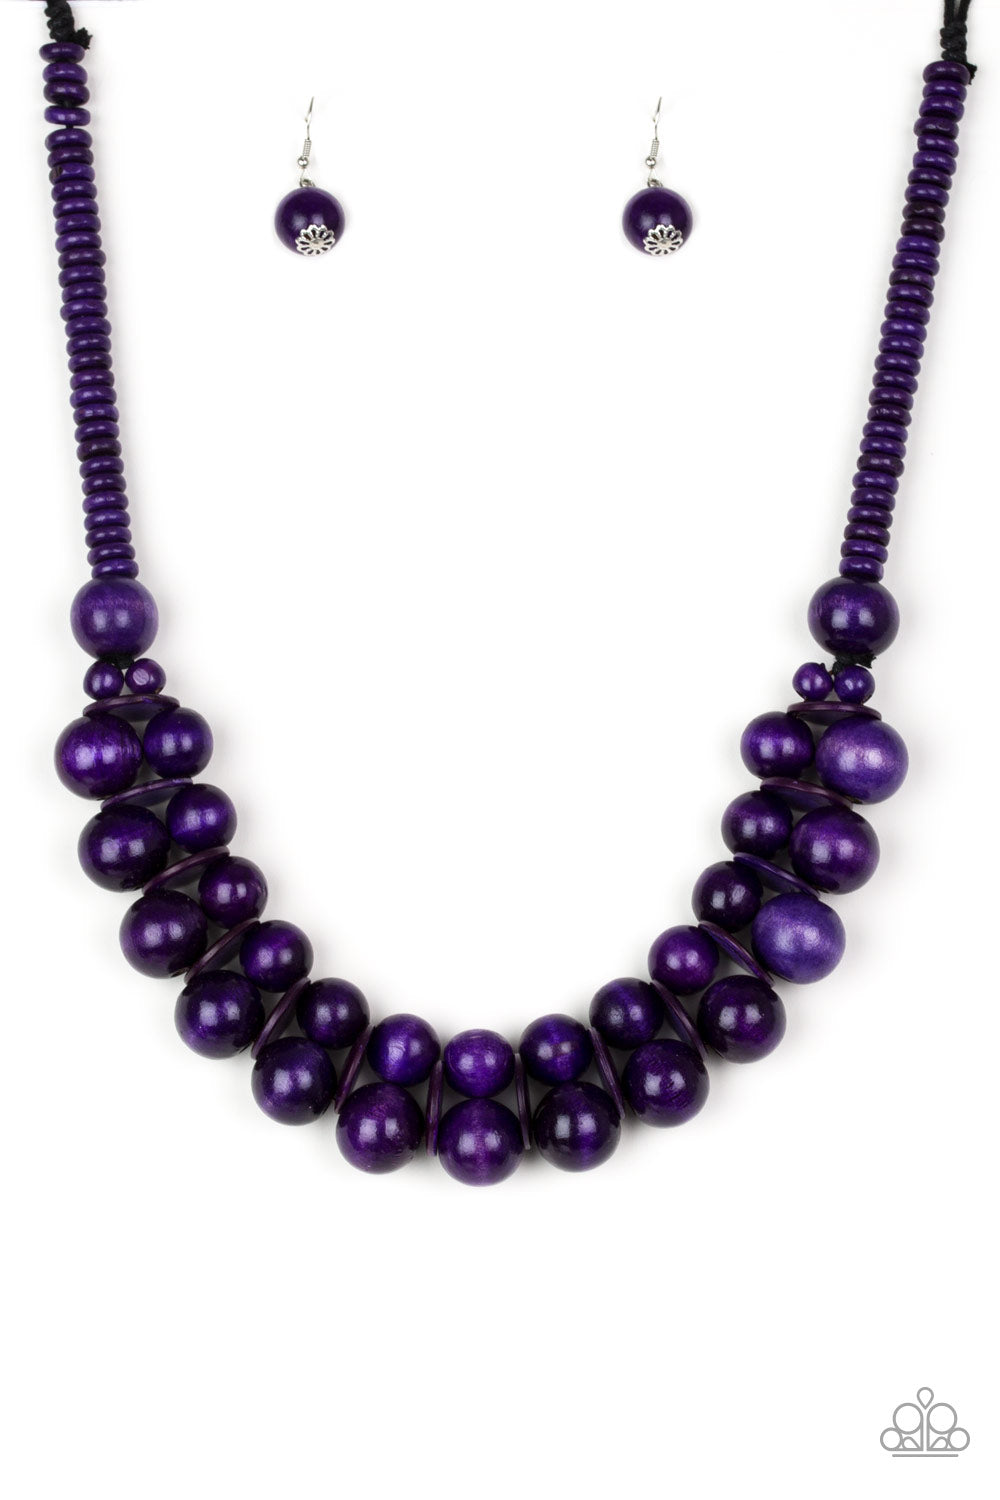 Caribbean Cover Girl Purple Paparazzi Necklace Cashmere Pink Jewels - Cashmere Pink Jewels & Accessories, Cashmere Pink Jewels & Accessories - Paparazzi